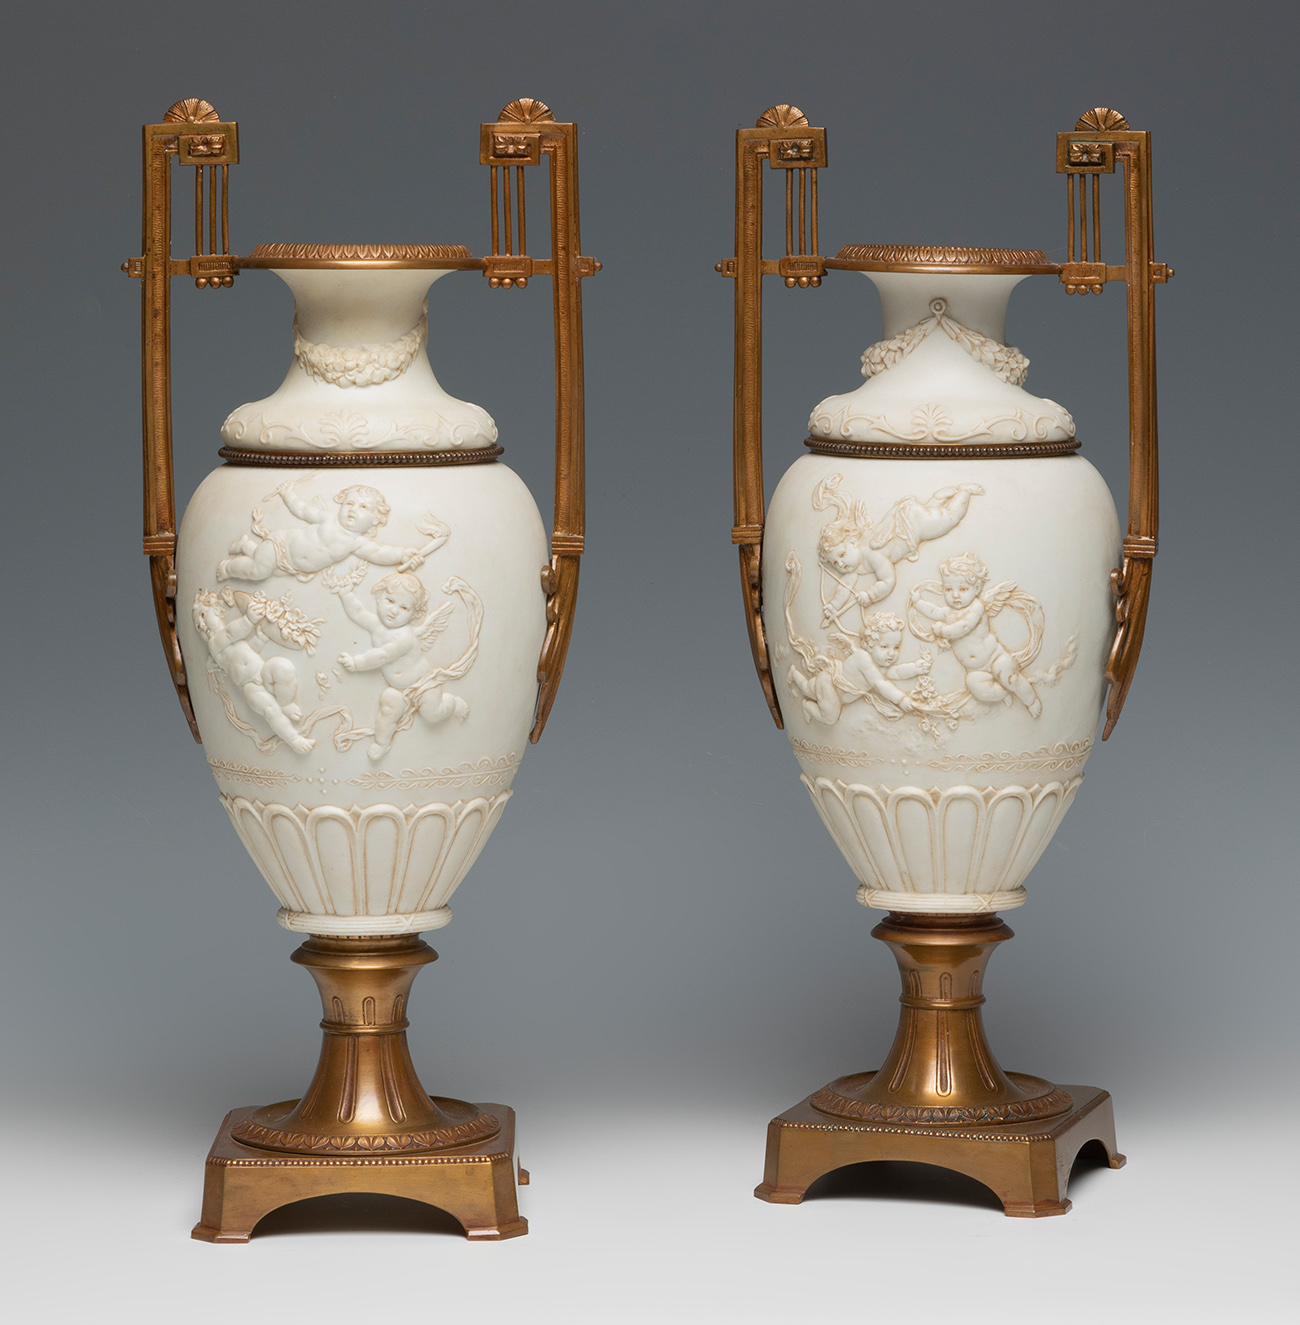 Pair of vases. France, 19th century.Biscuit and bronze.Measurements: 45 cm. high.Pair of vases in